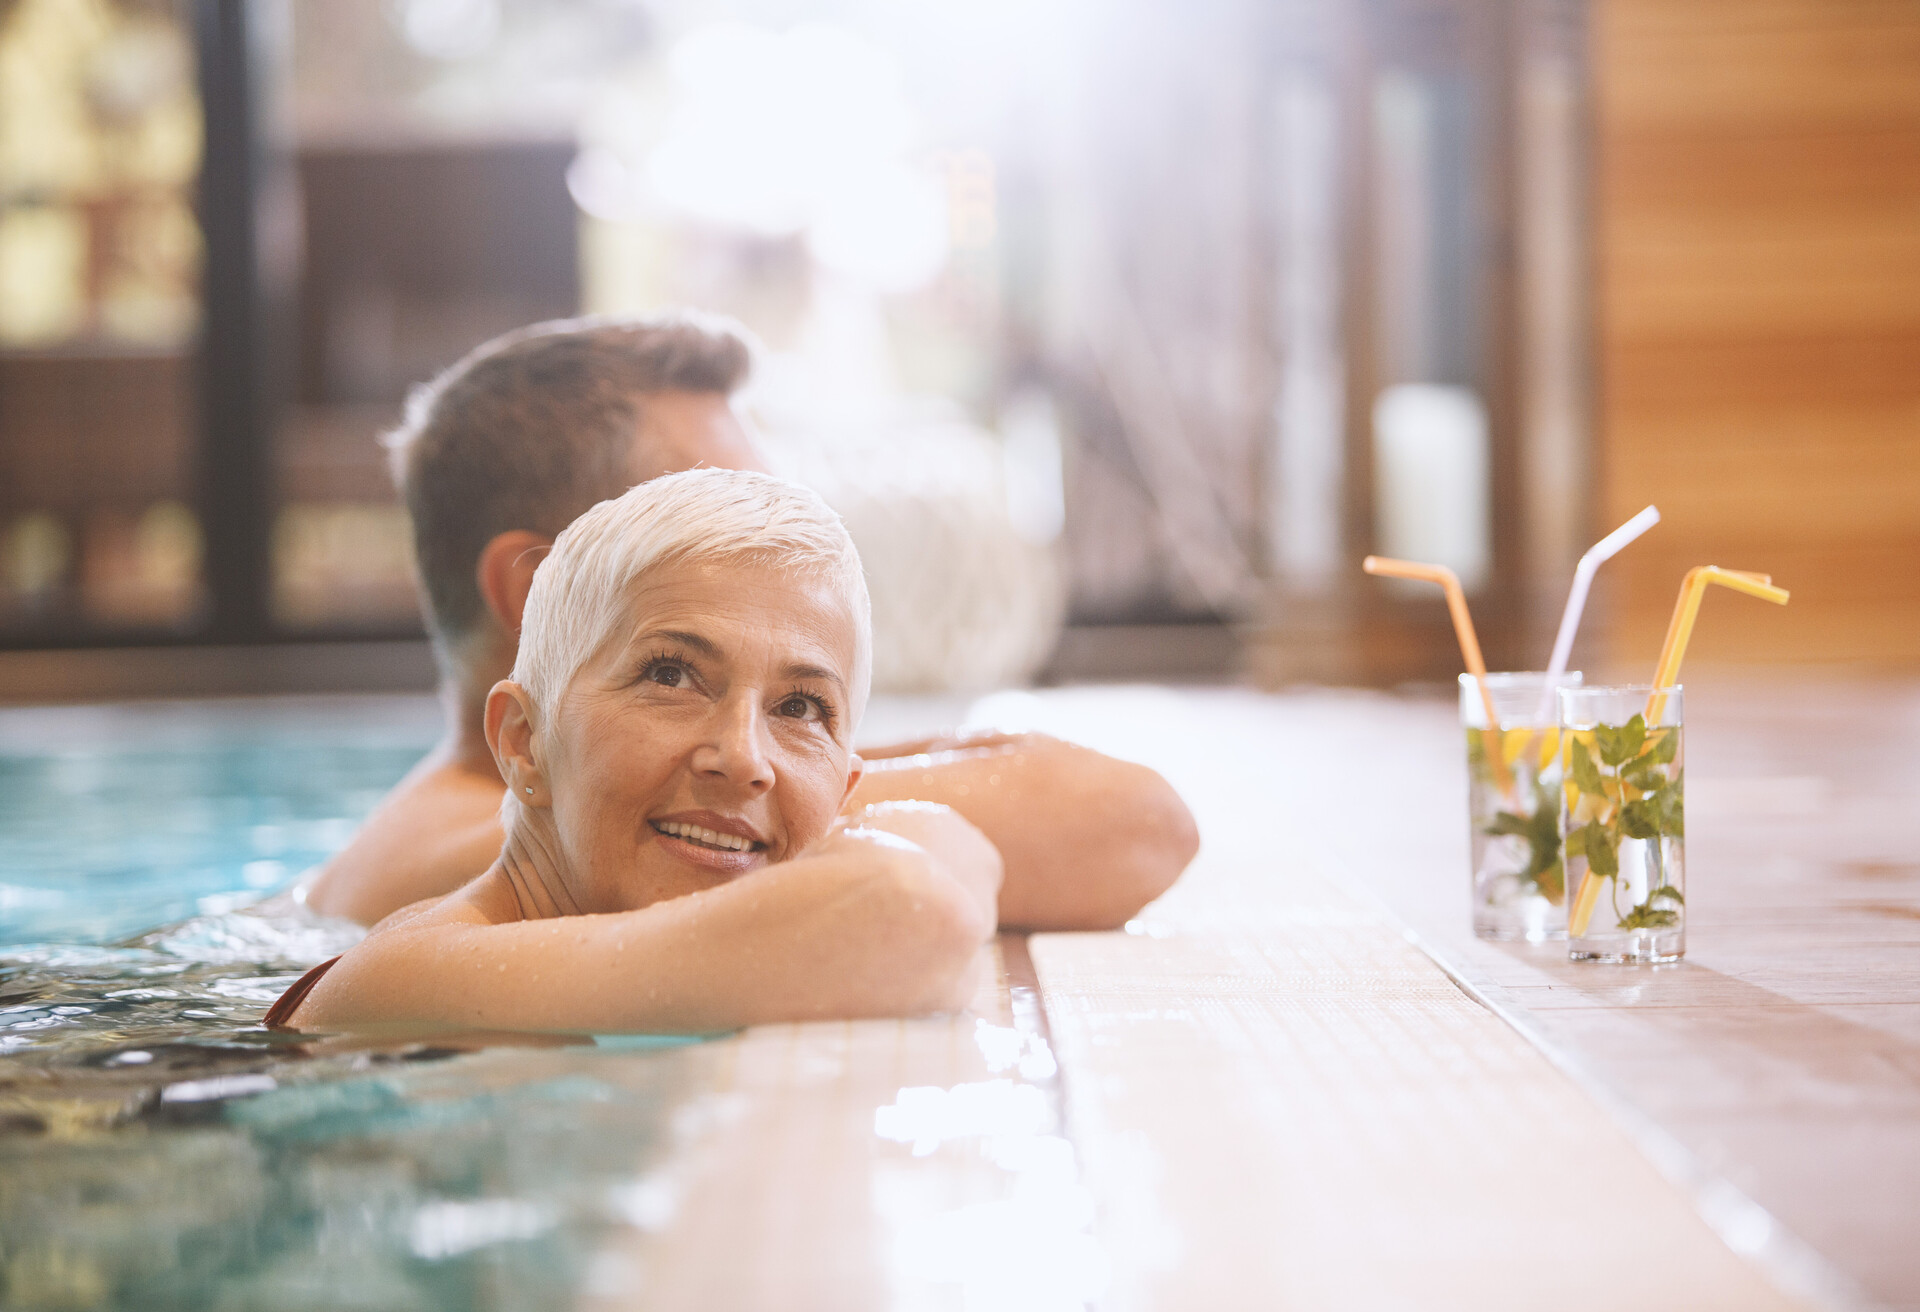 Senior woman and her husband are enjoying the day at the spa. They are relaxing in the indoor swimming pool, having cocktails and enjoying the sun shining through windows.